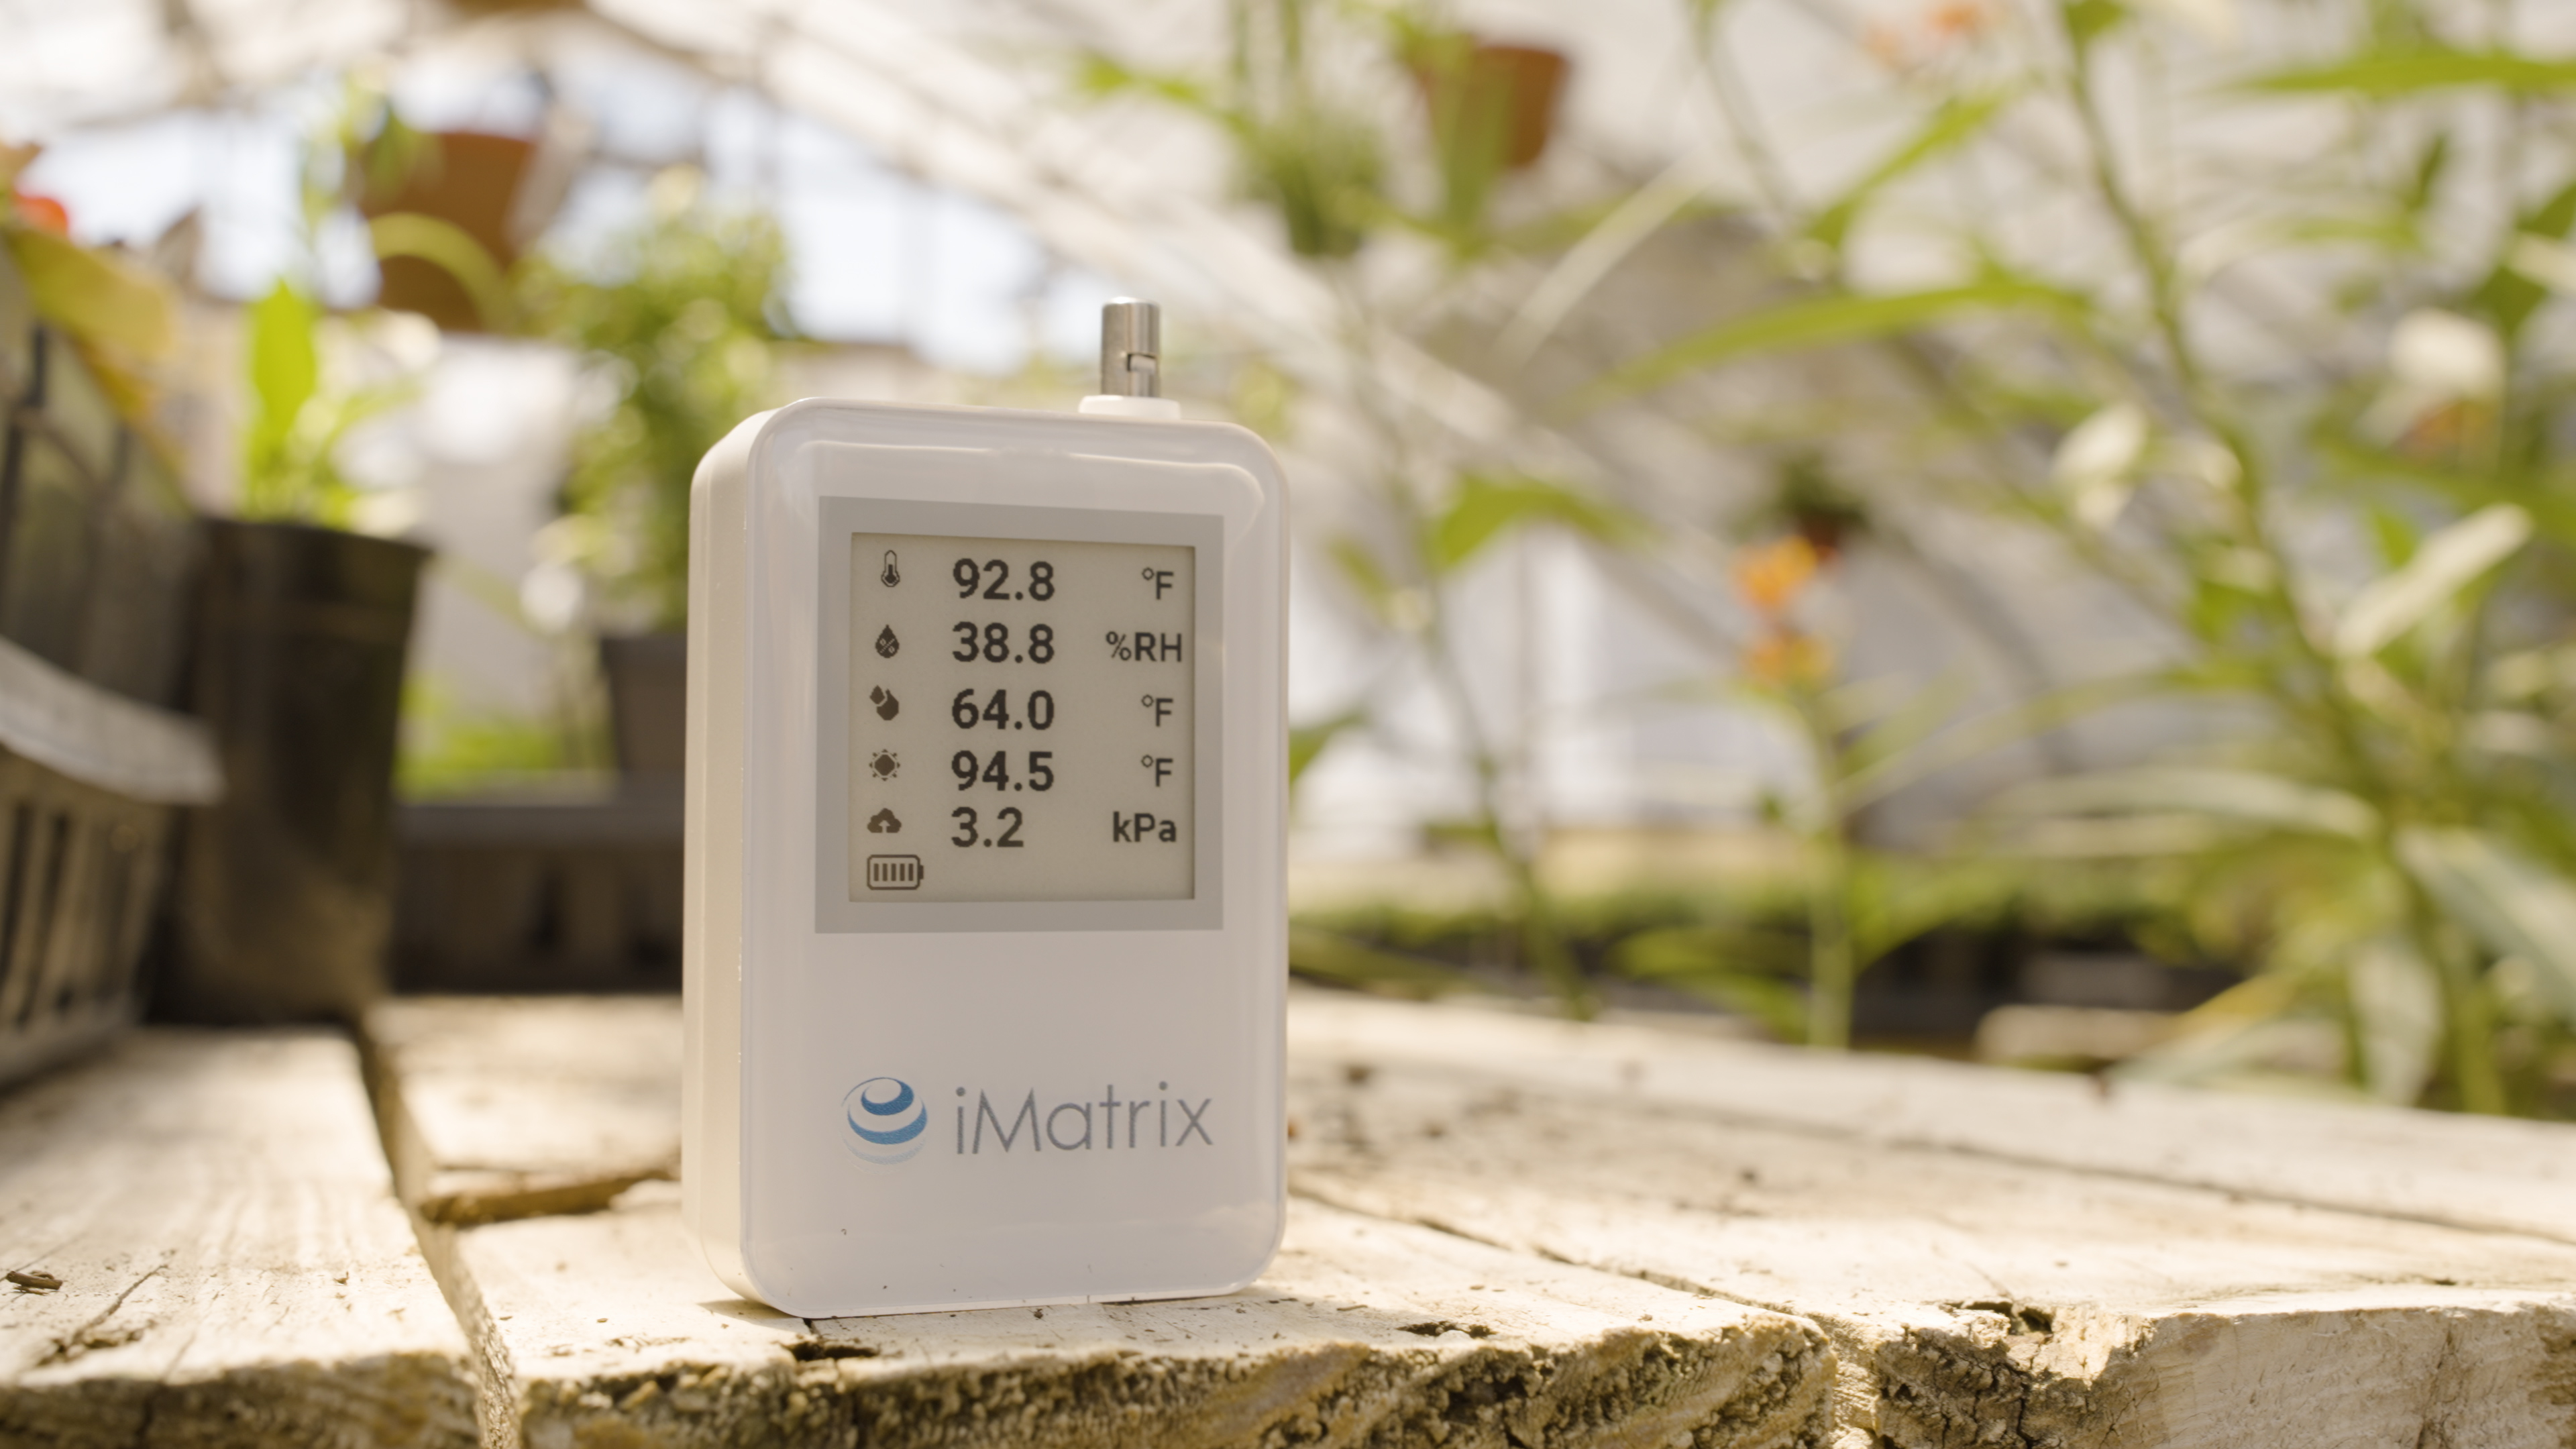 iMatrix's NEO Series IoT Devices Leverage Nordic-powered Temperature and Humidity  Sensors to Monitor Commercial Food Industry Refrigeration and HVAC  Equipment